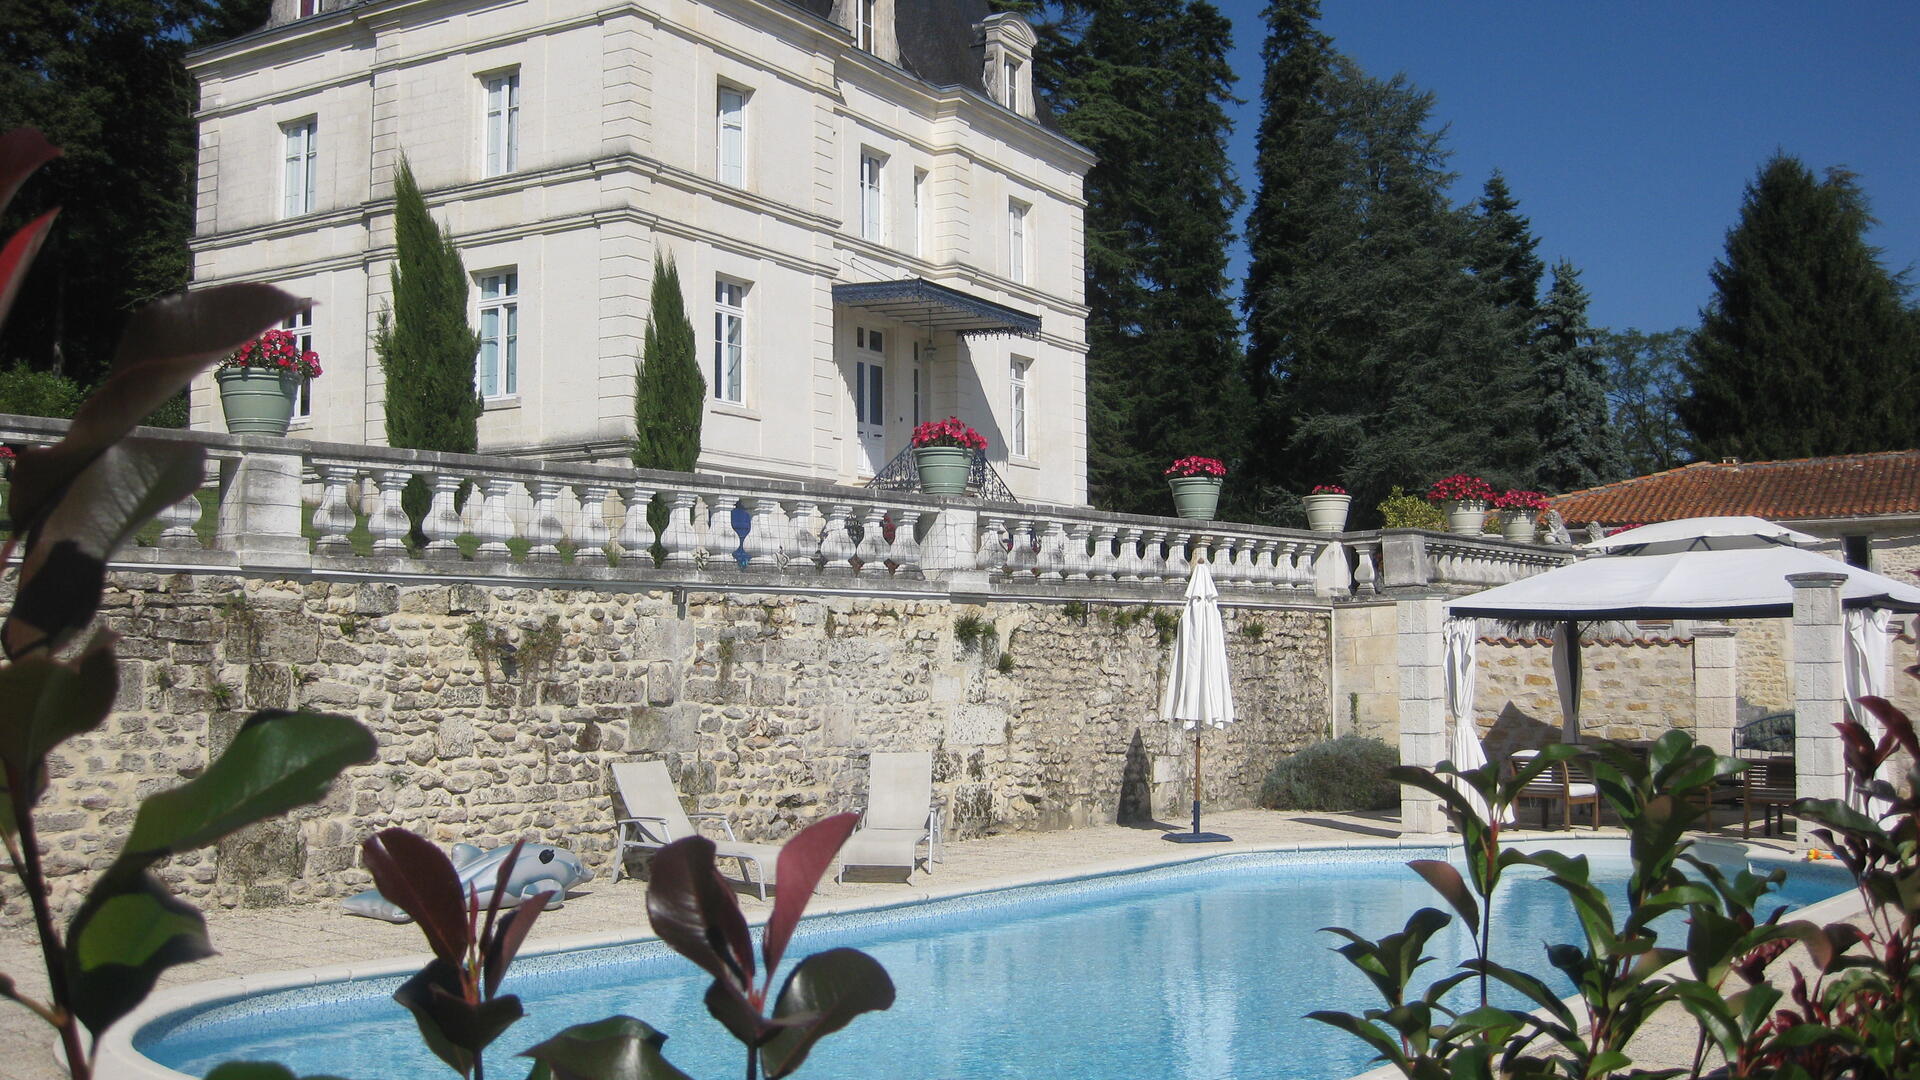 Family-friendly holiday chateau perfect for group holidays in France